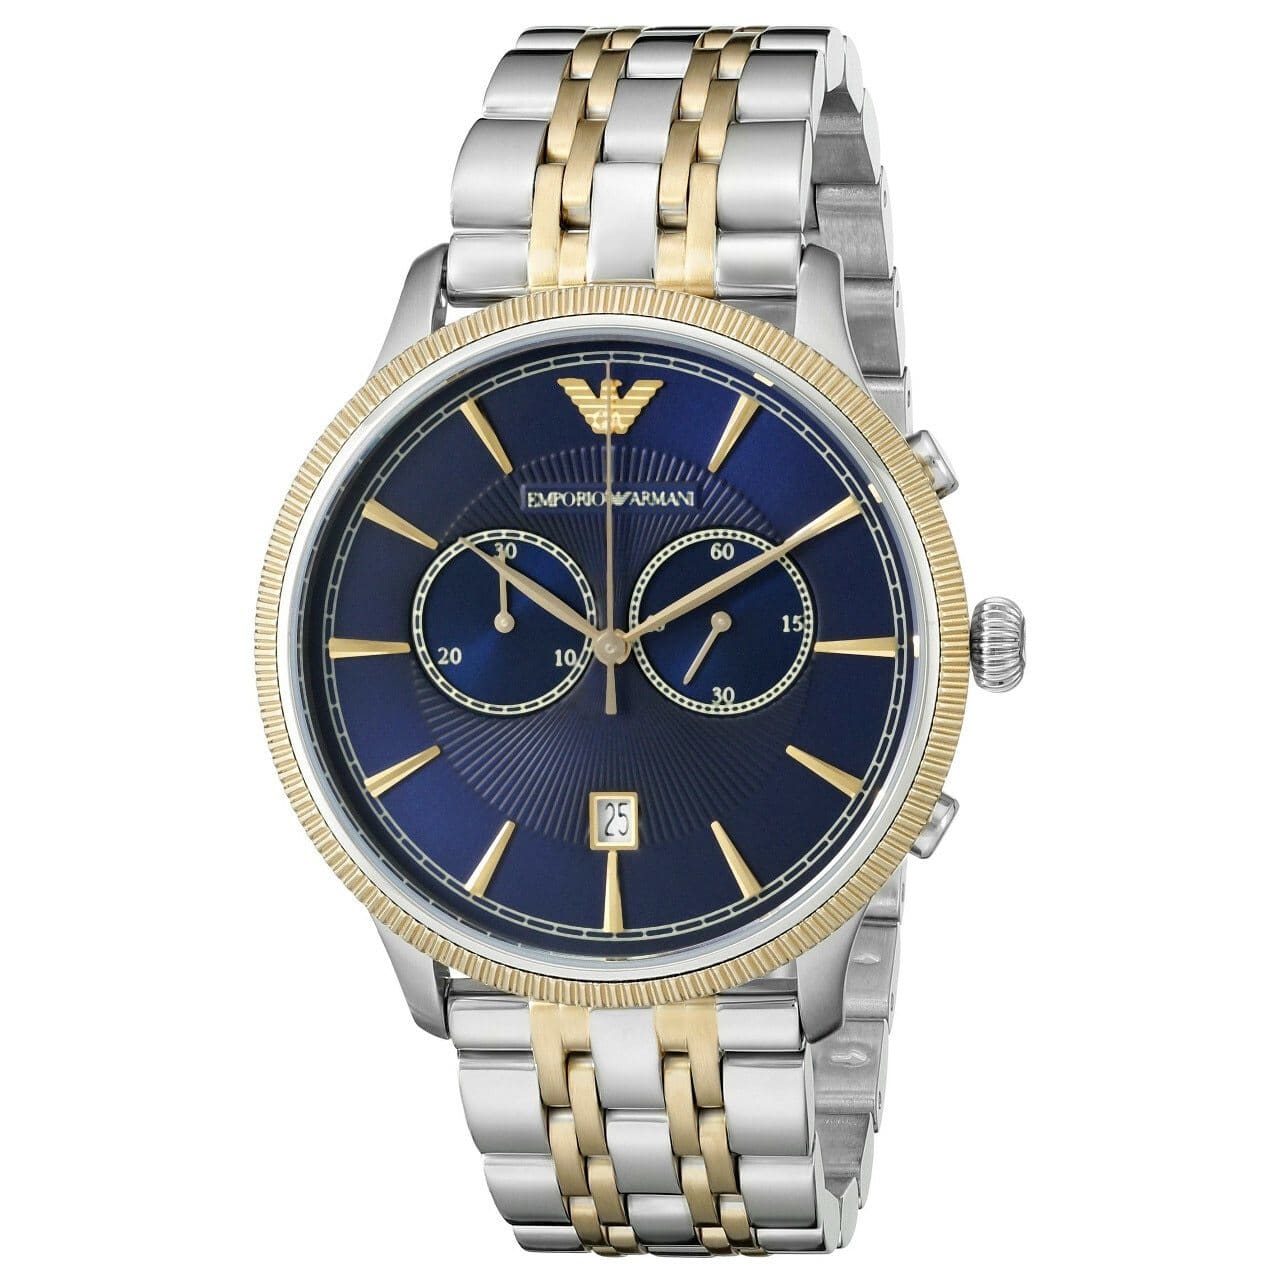 Emporio Armani AR1847 Classic Navy Blue Dial Two-tone Stainless Steel Chronograph Men's Watch